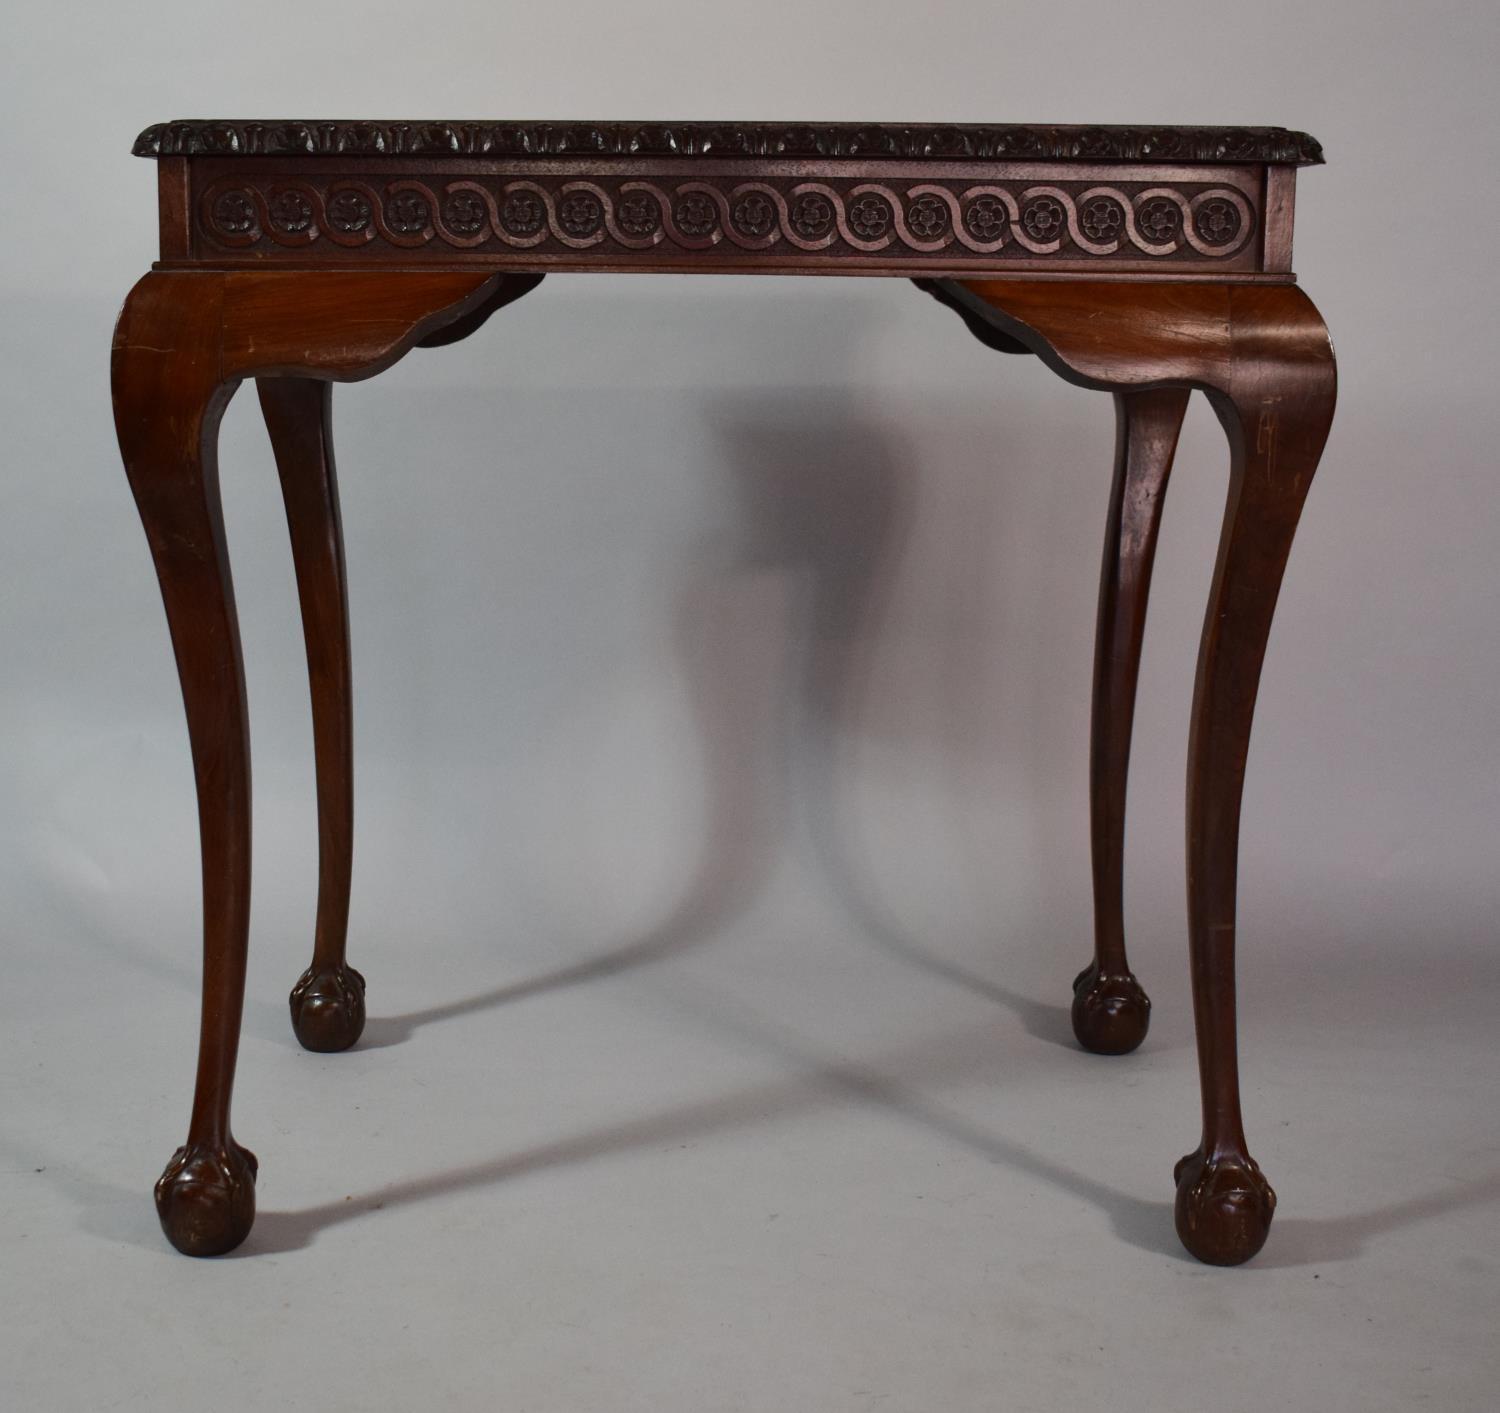 A Mahogany Silver Table with Carved Border set on Cabriole Legs culminating in Claw and Ball Feet,